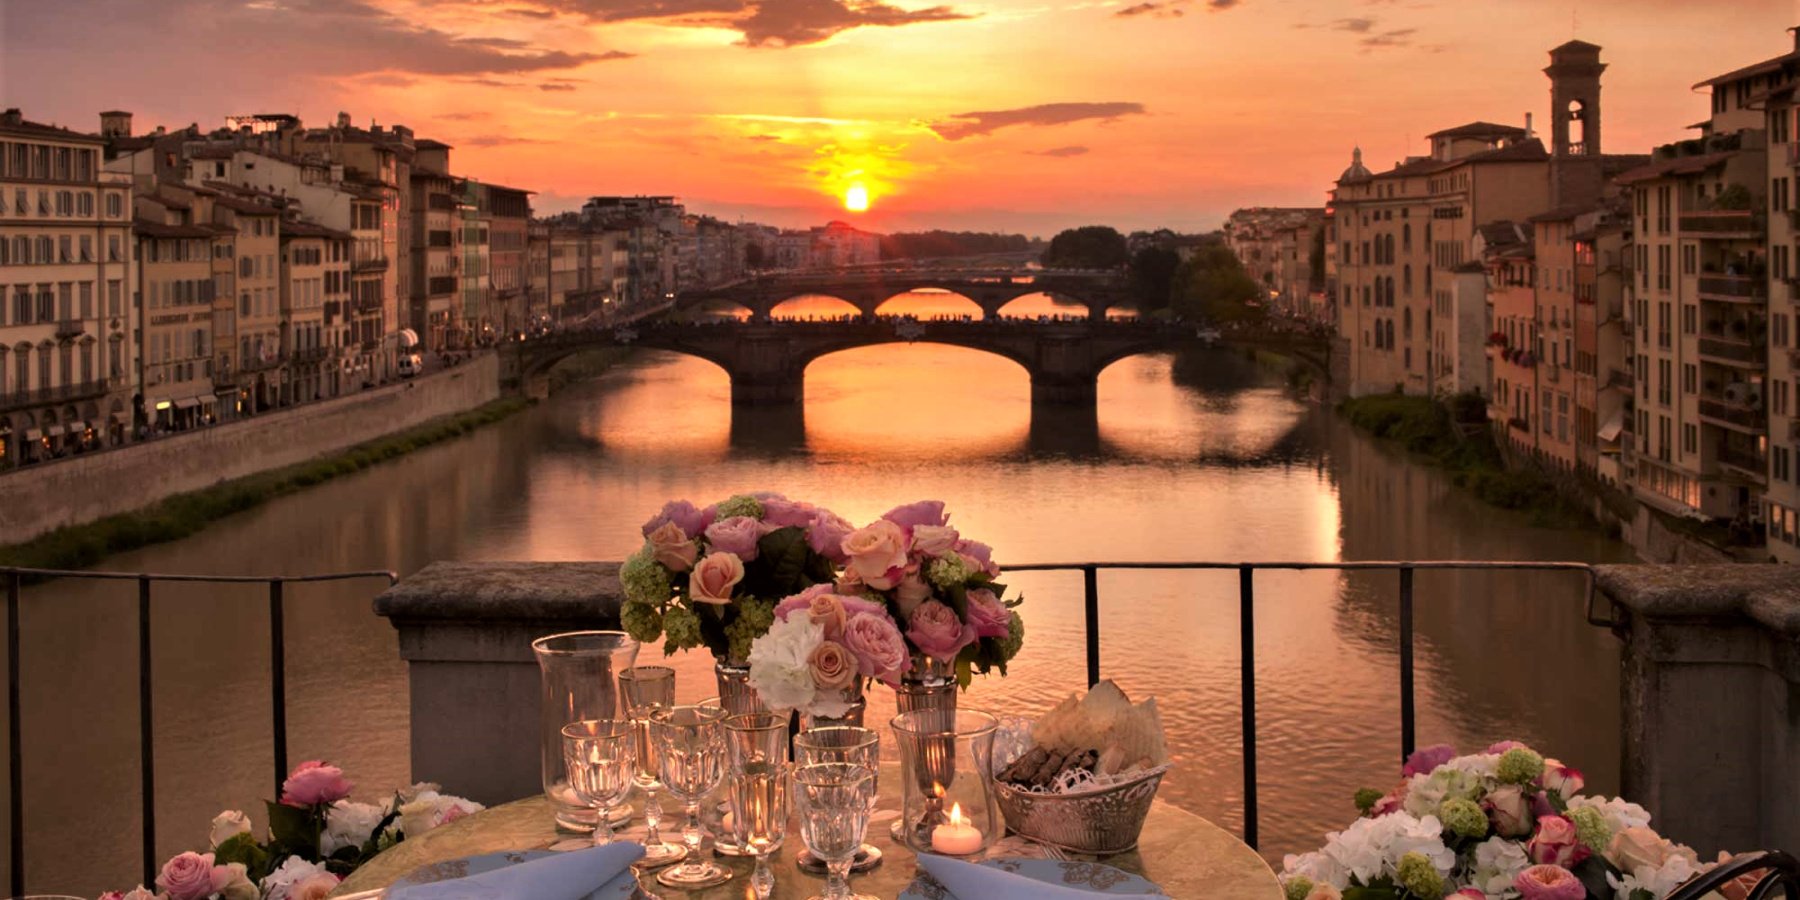 Picture of a dining table infront of a river at sunset